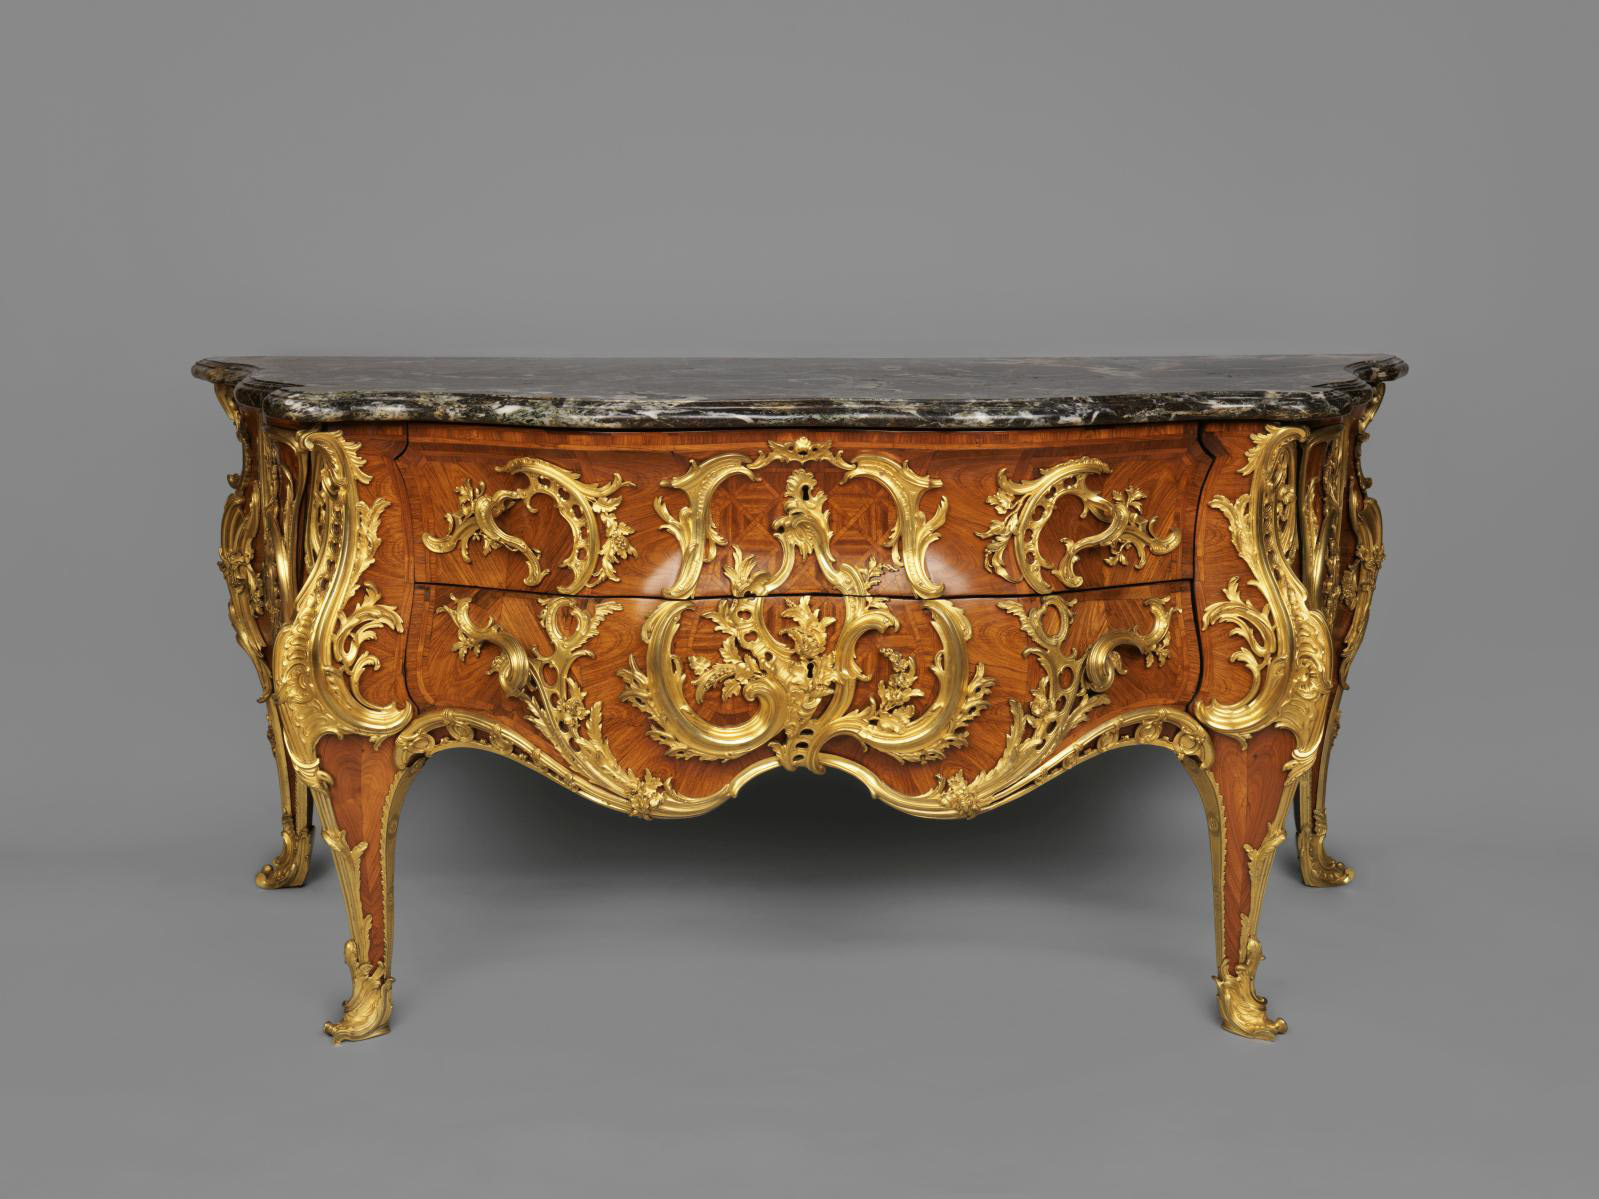 Louis XV’s Bedroom Chest of Drawers at Versailles